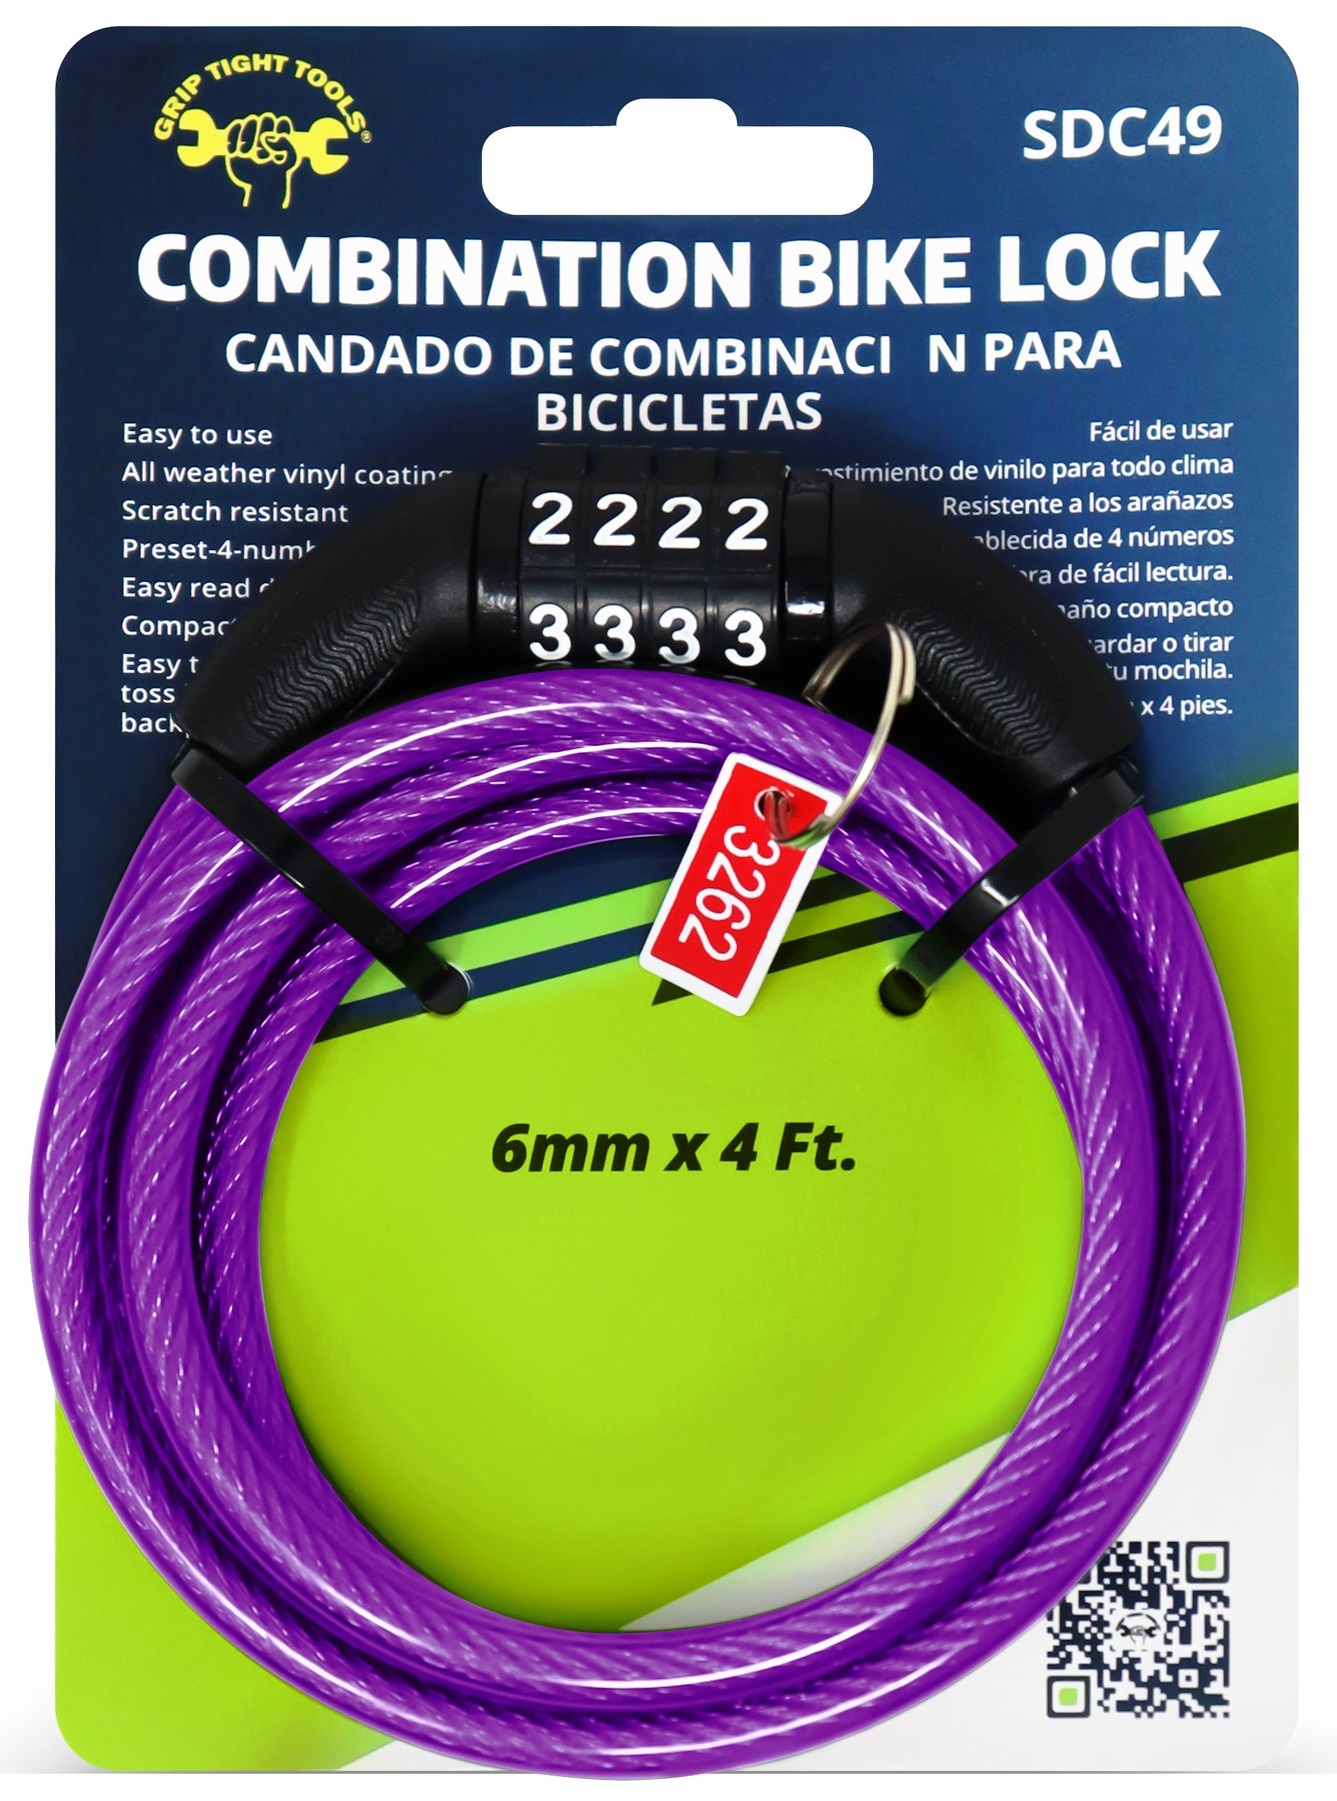 SDC49-purple-4-ft.-X-6mm-Self-Coiling-Cable-Combination-Bike-Lock